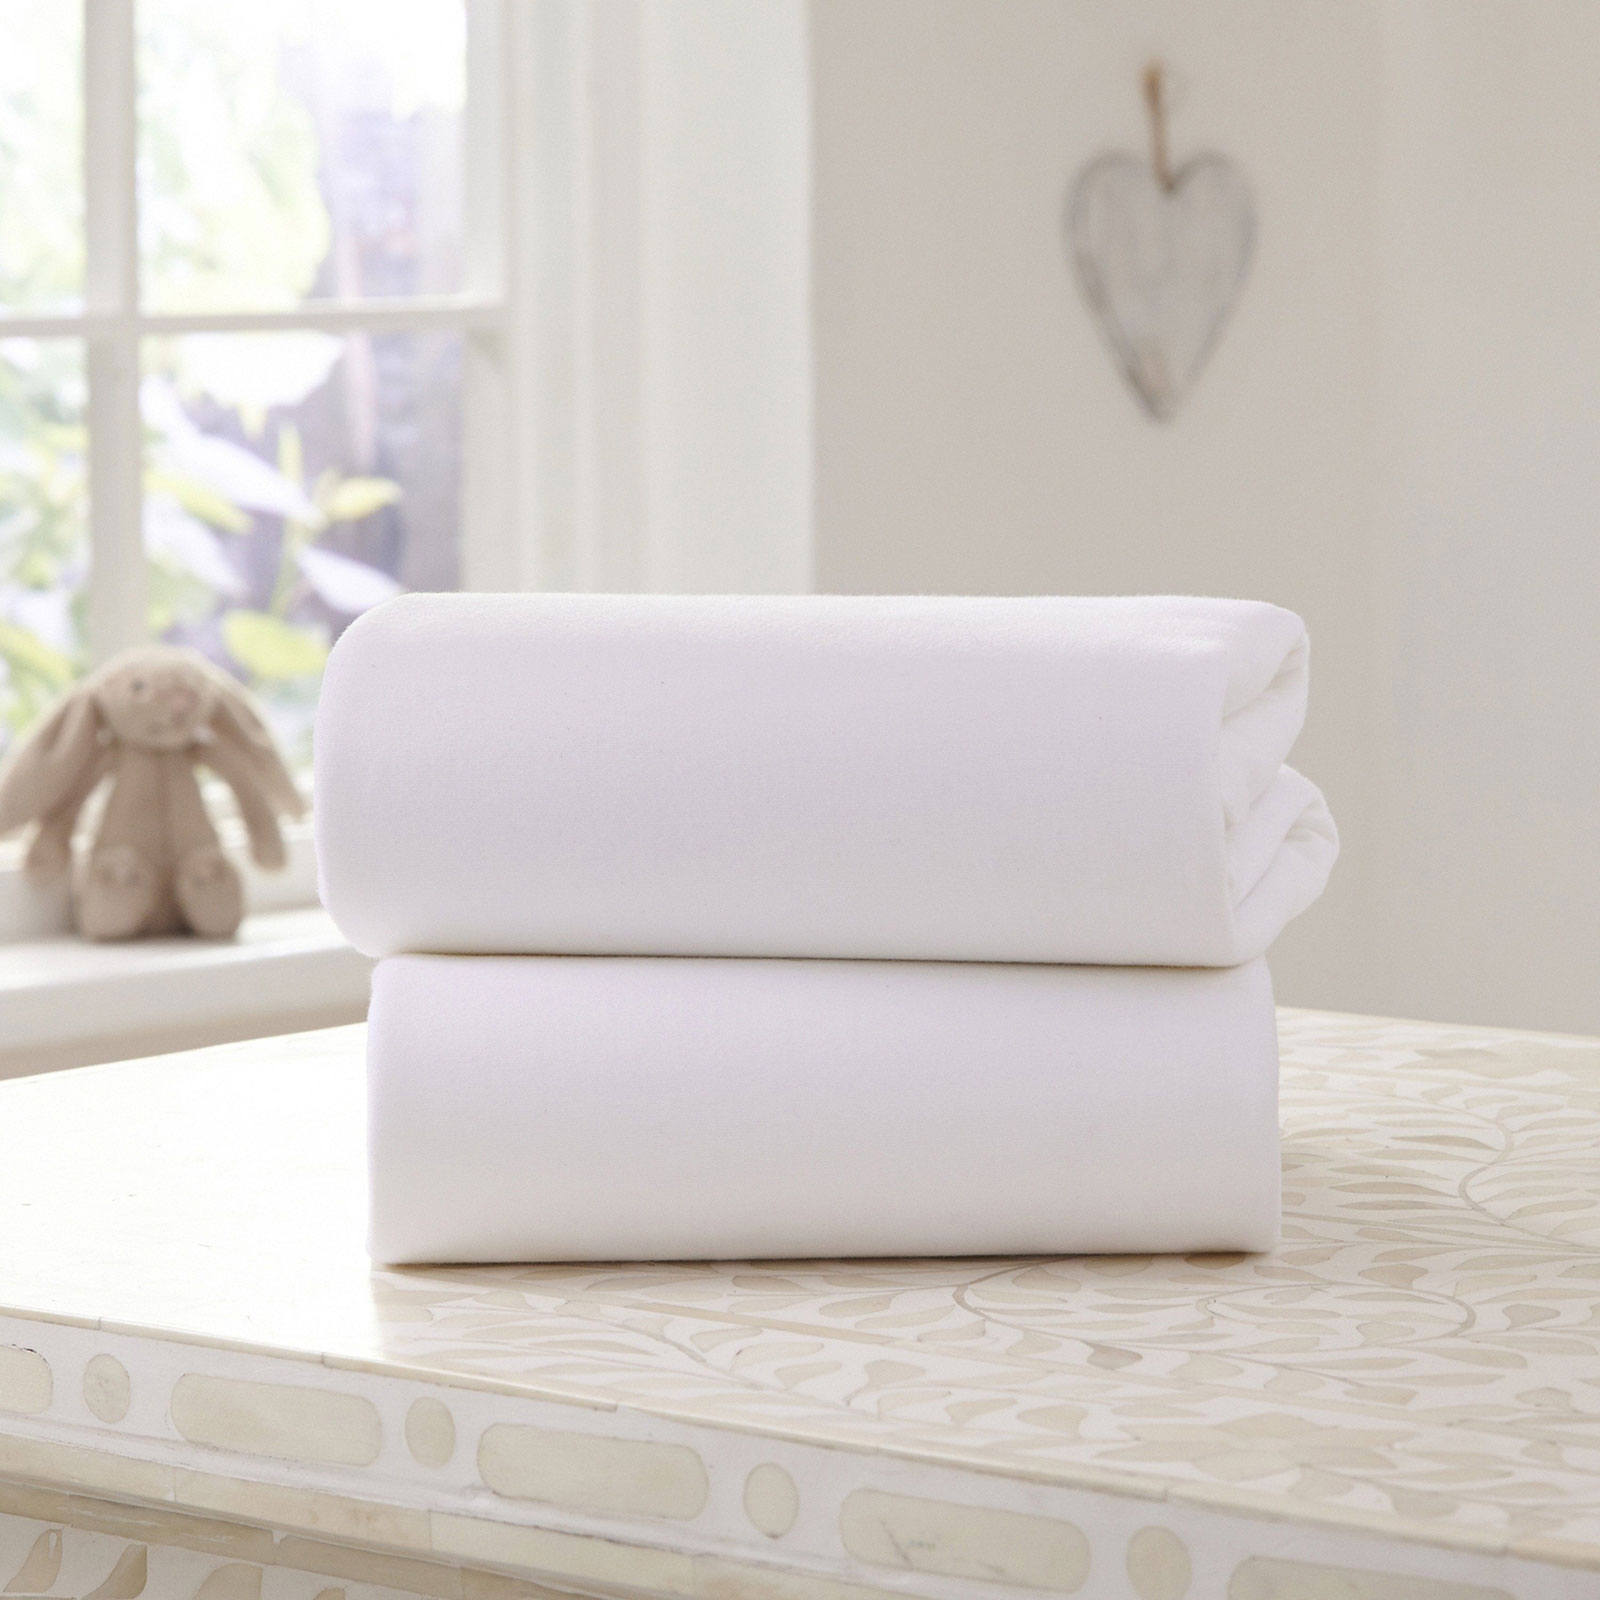 2 Pack Bedside Crib Fitted Sheets 90 x 50 - White